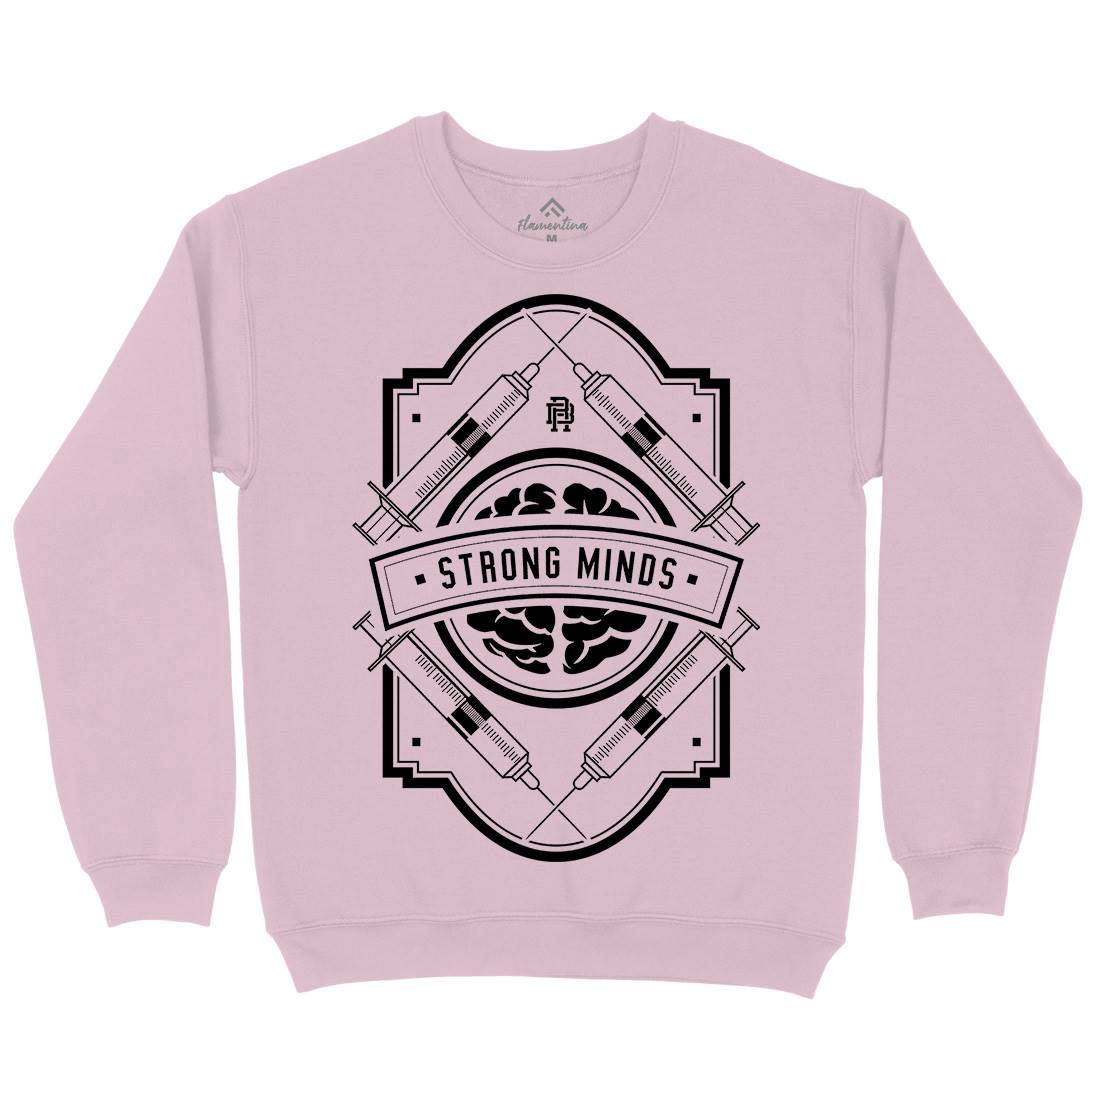 Strong Minds Kids Crew Neck Sweatshirt Quotes A288